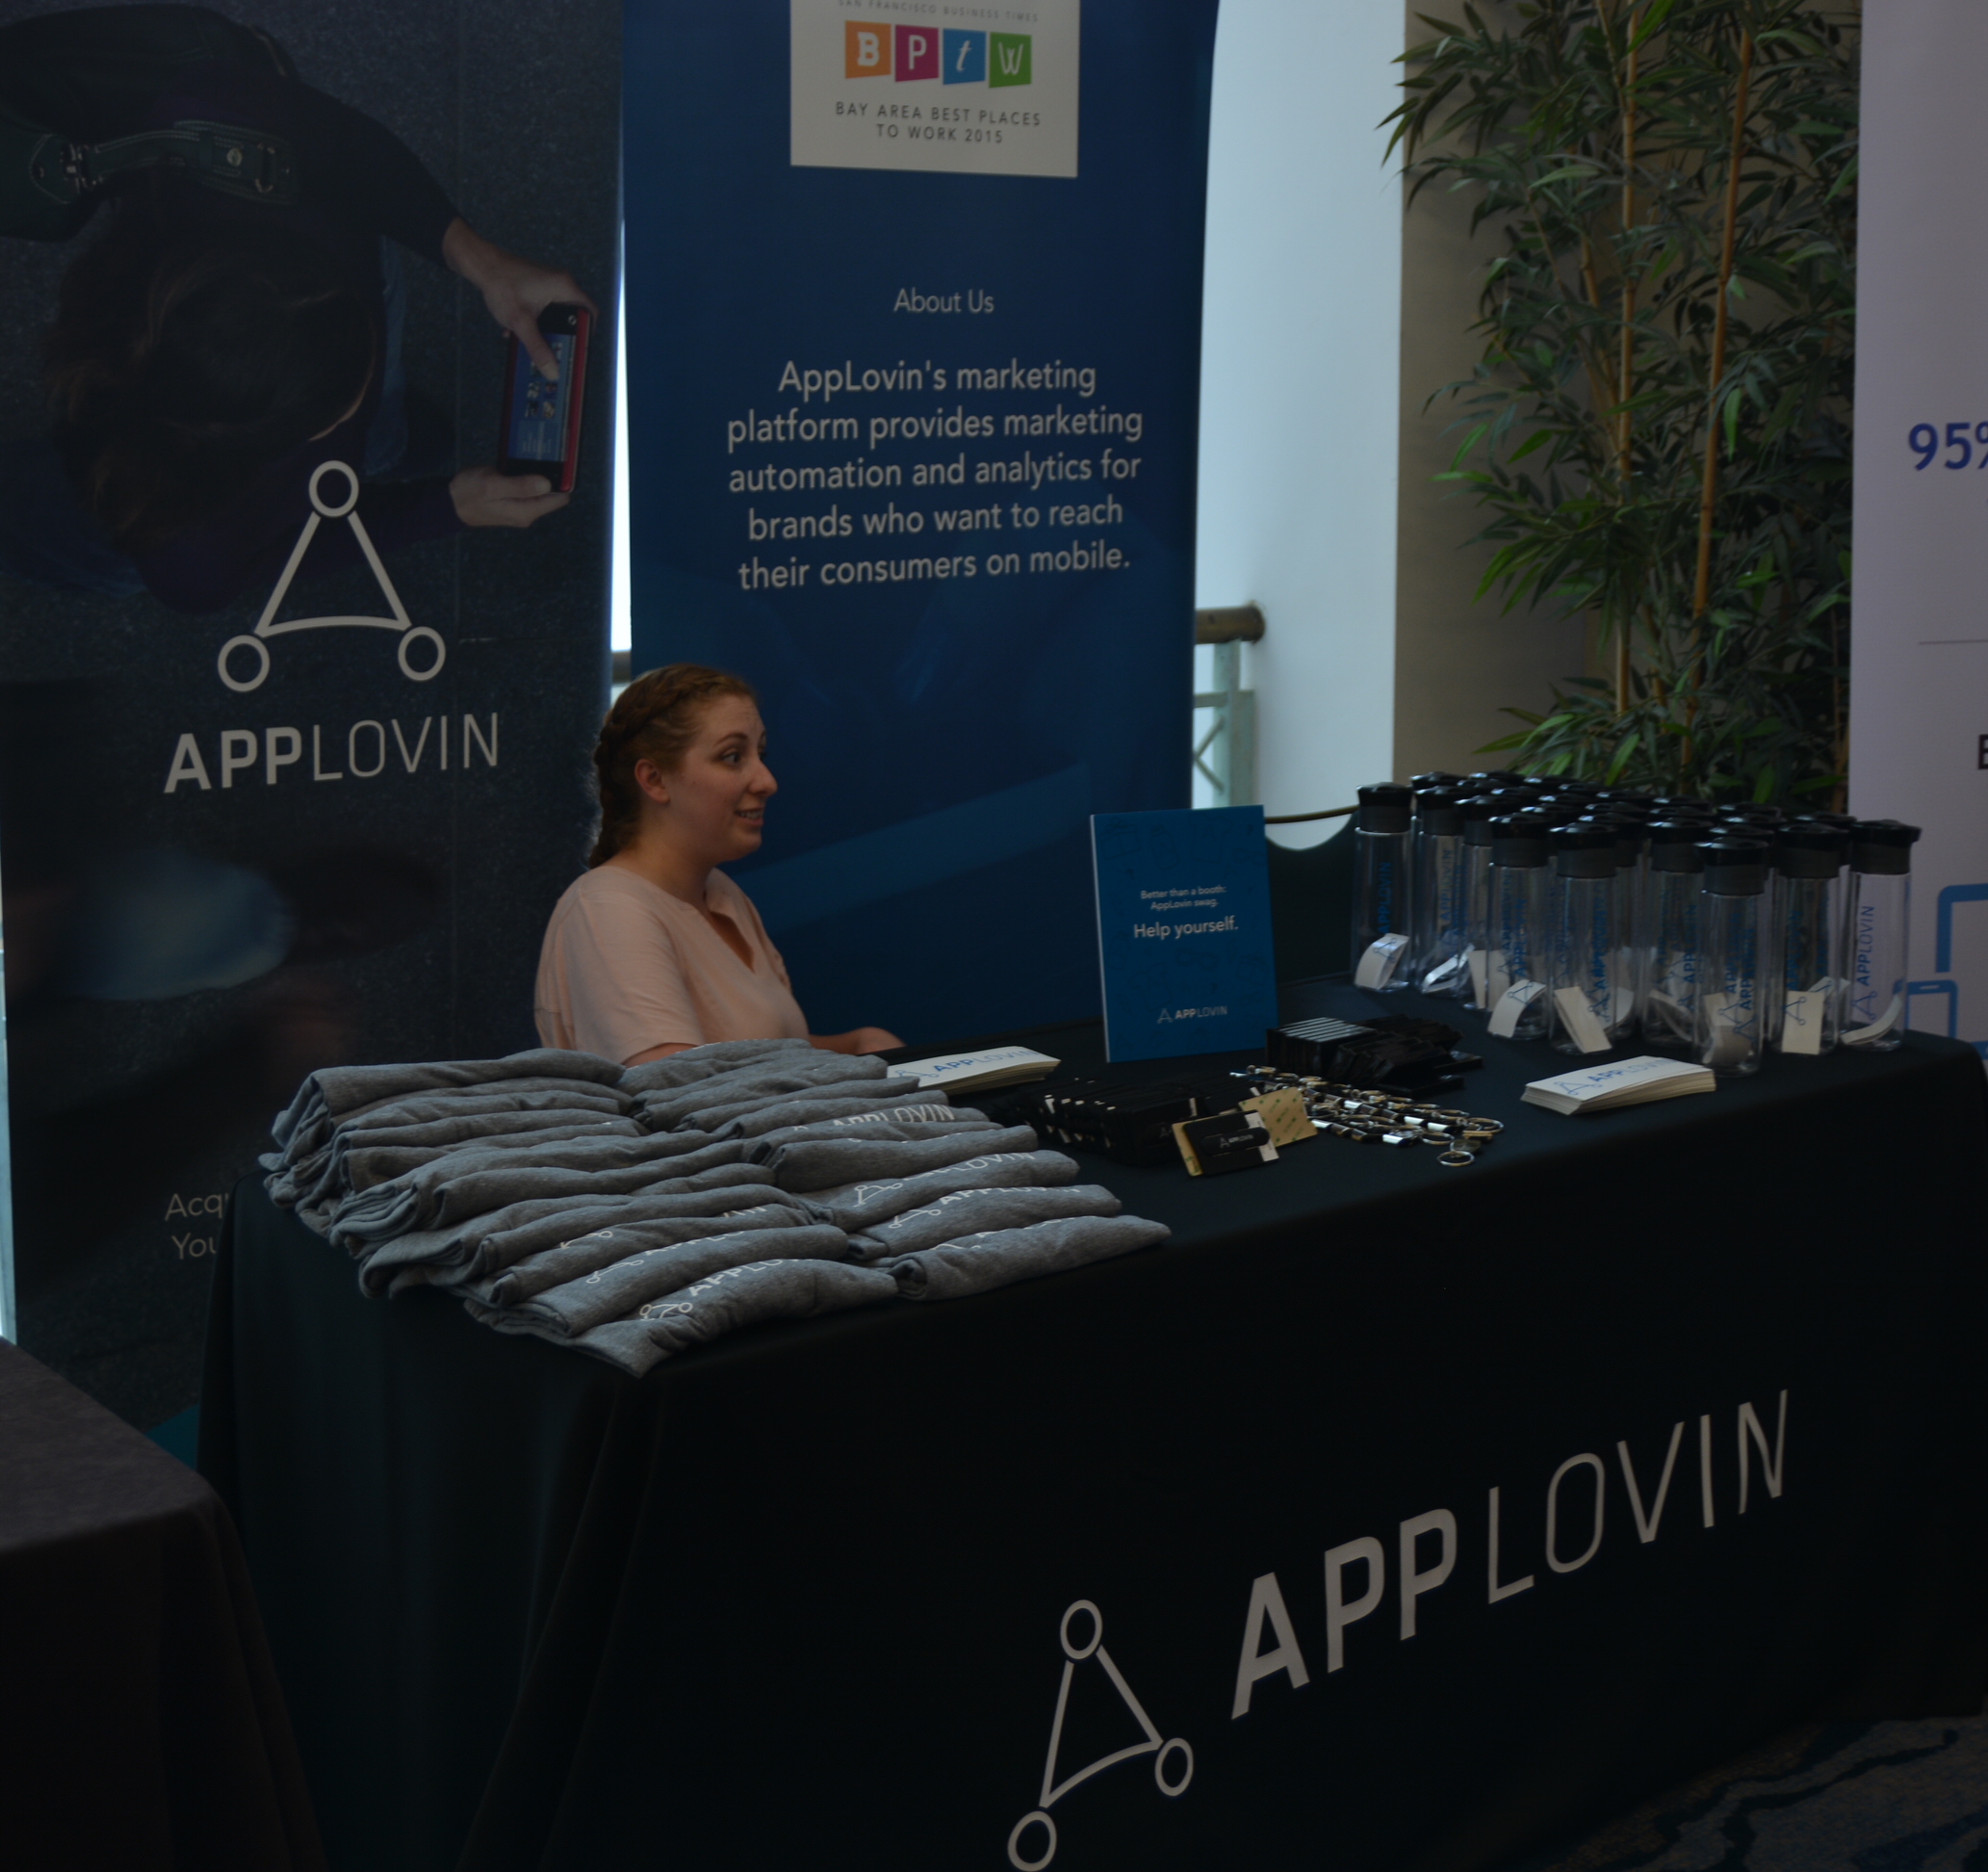 Applovin had a lot of swag to give out as well!